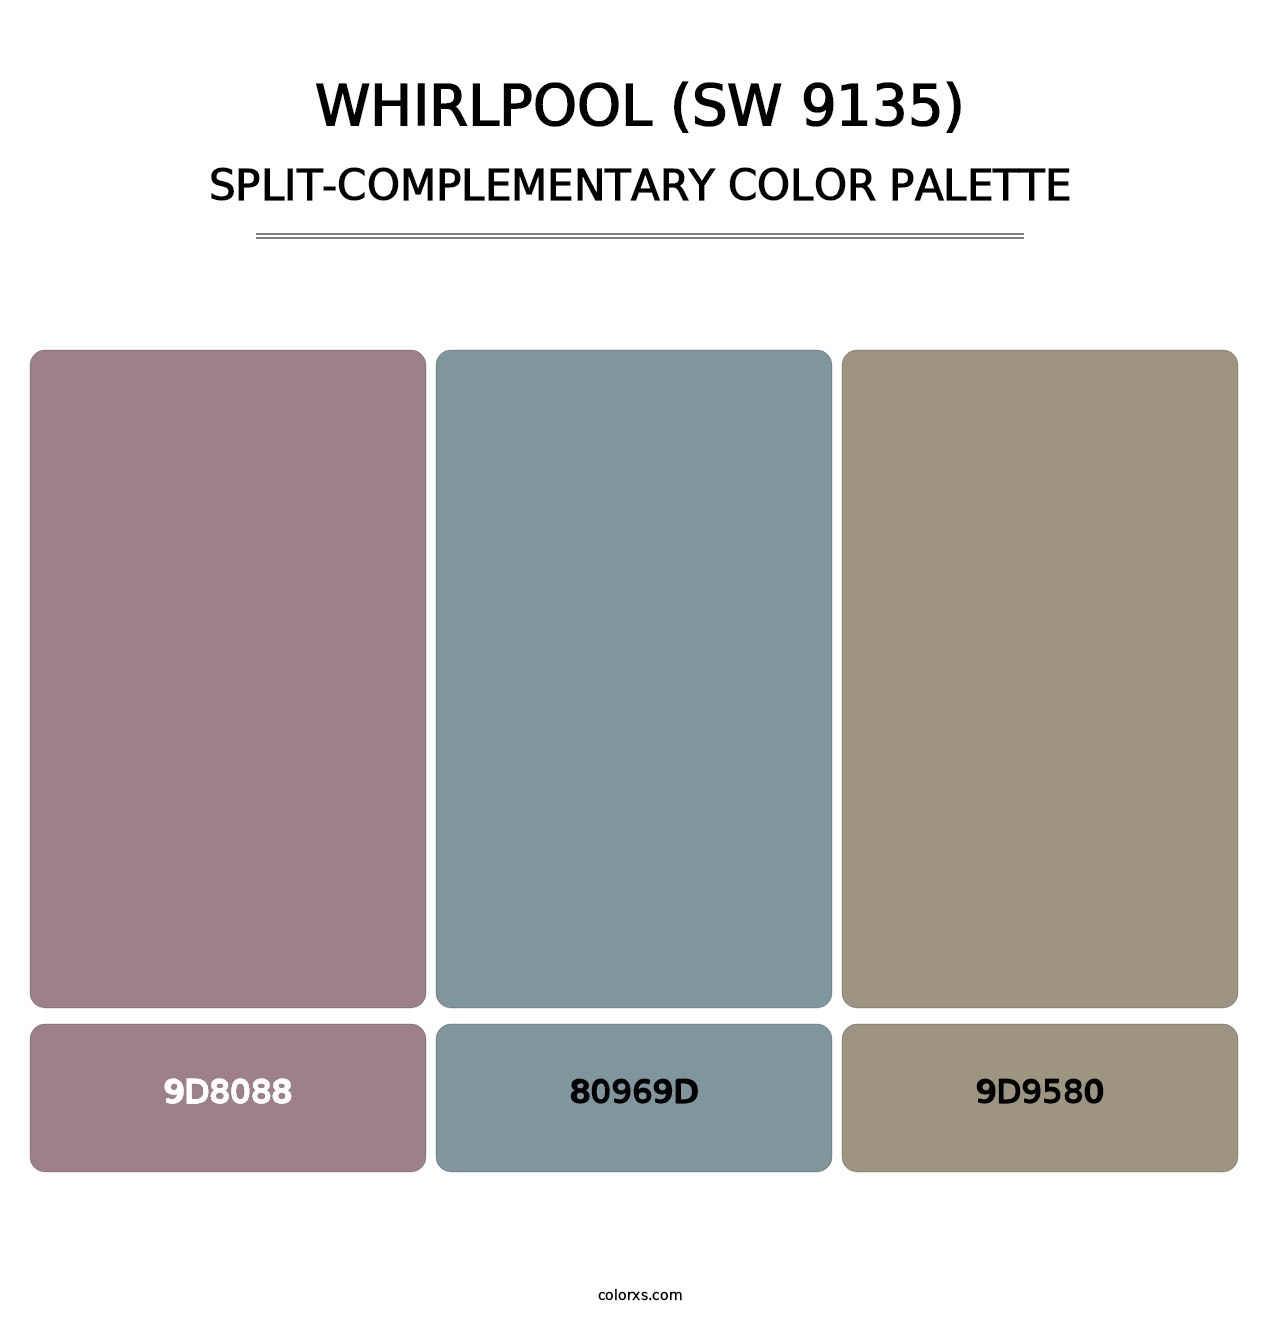 Whirlpool (SW 9135) - Split-Complementary Color Palette